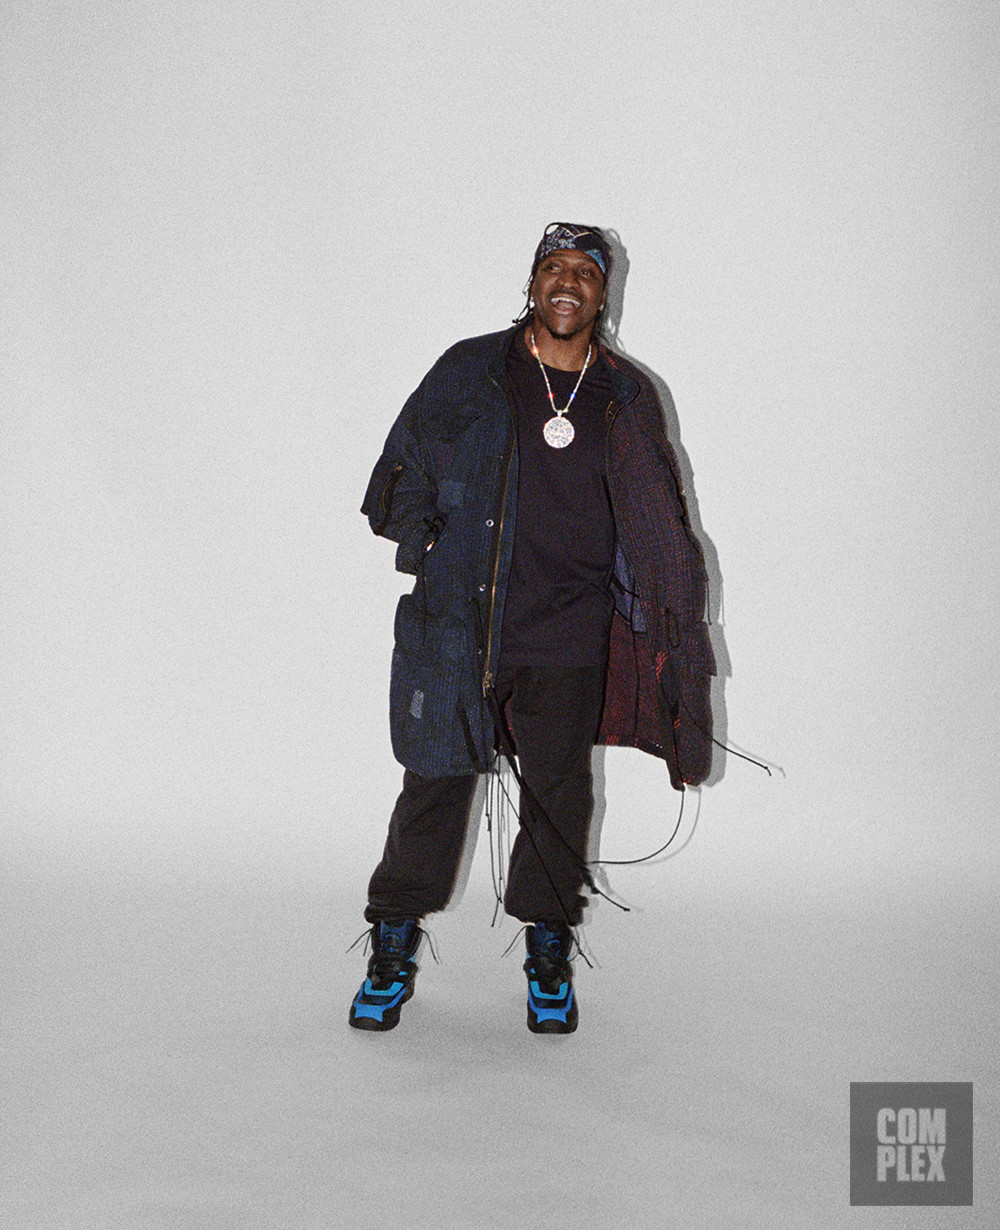 Pusha T poses for his Complex interview